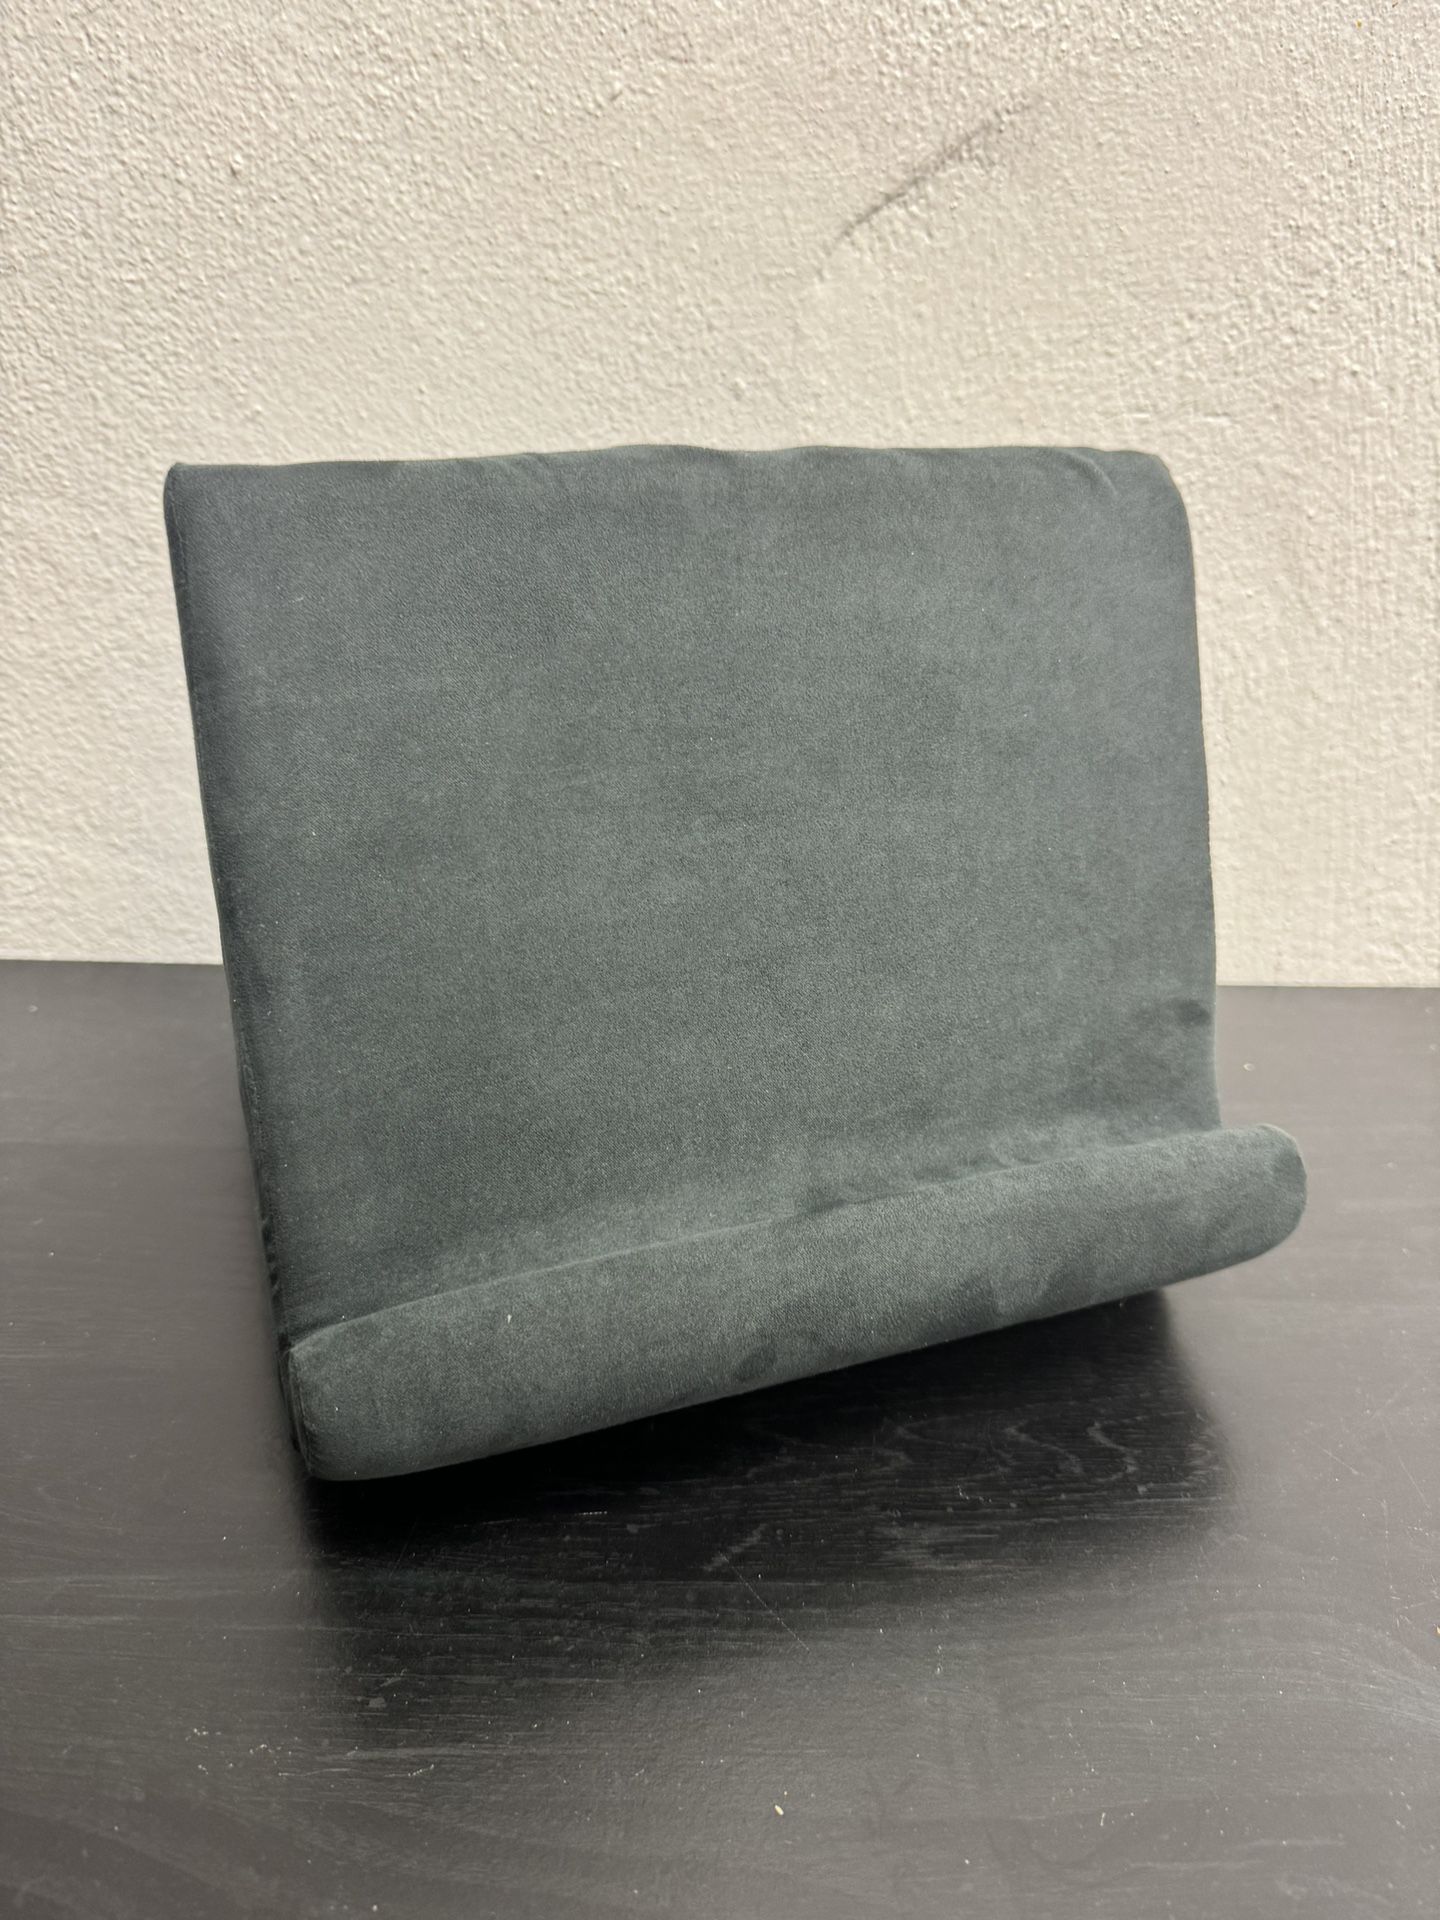 ablet Pillow Stand And IPad Holder For Lap, Desk And Bed